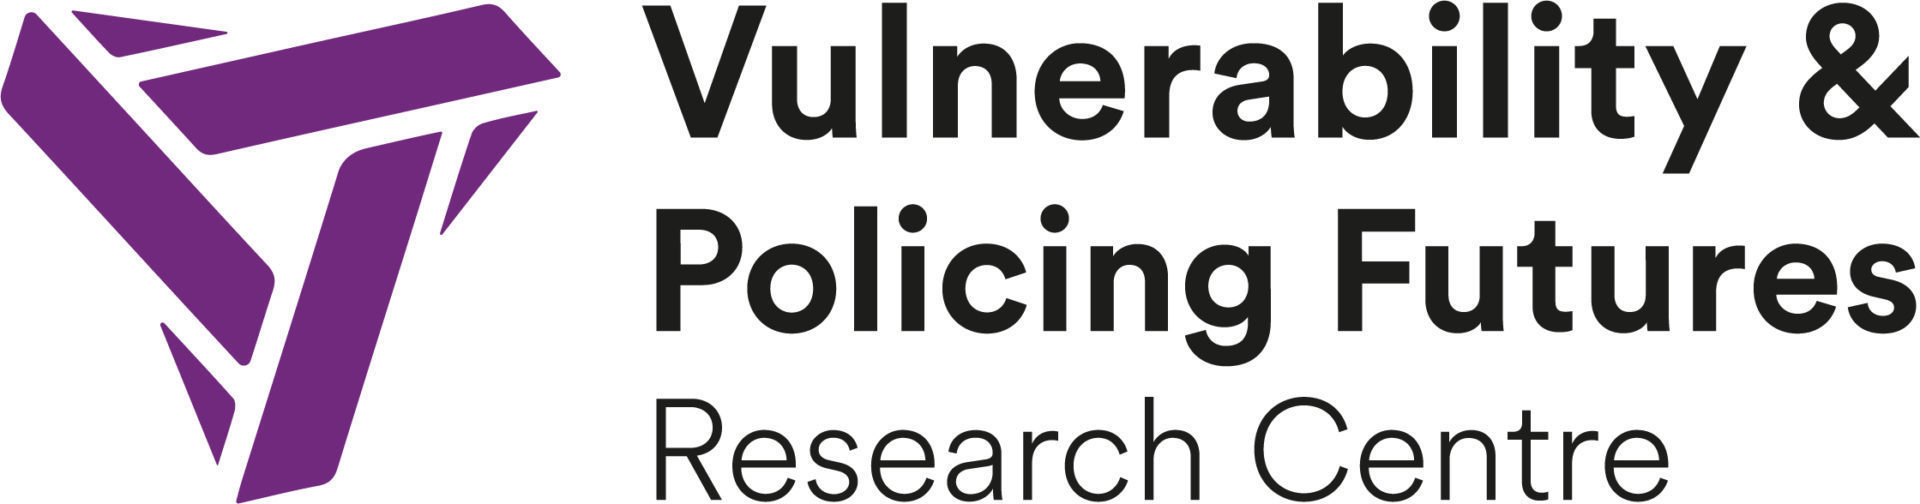 Vulnerability & Policing Futures Research Centre